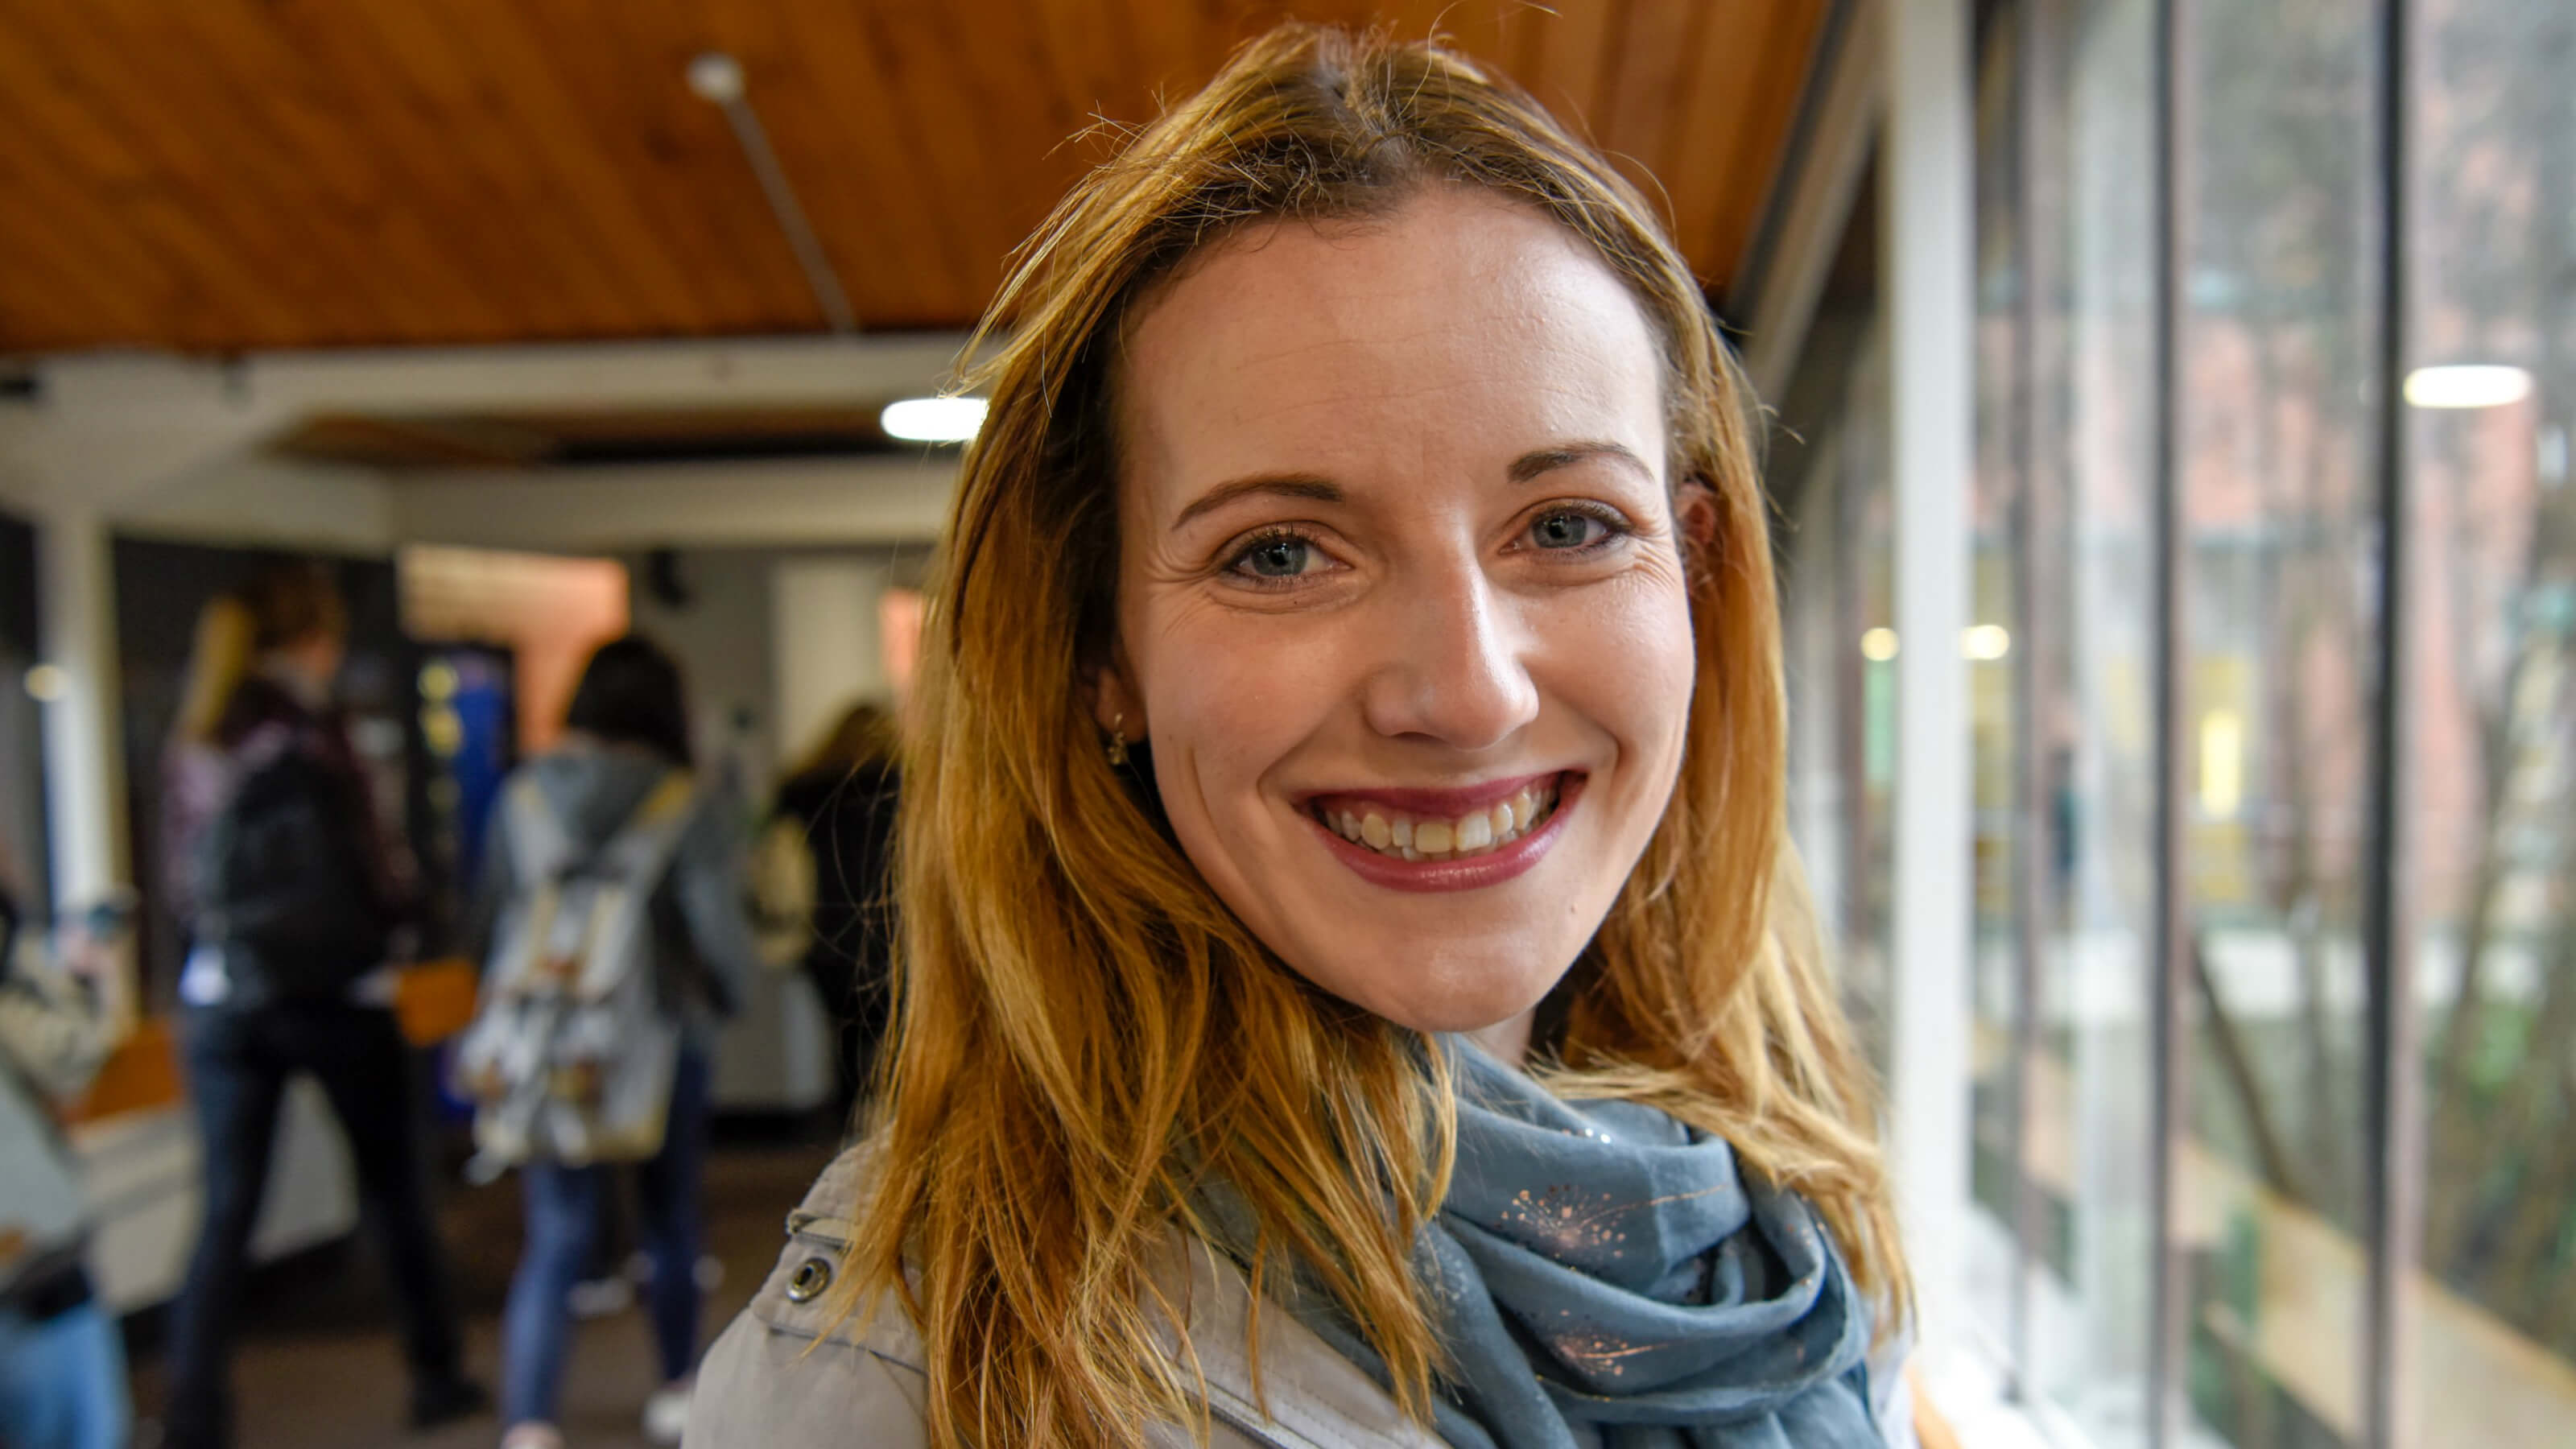 A profile image of Holly Mcleod Master of Development Studies student.